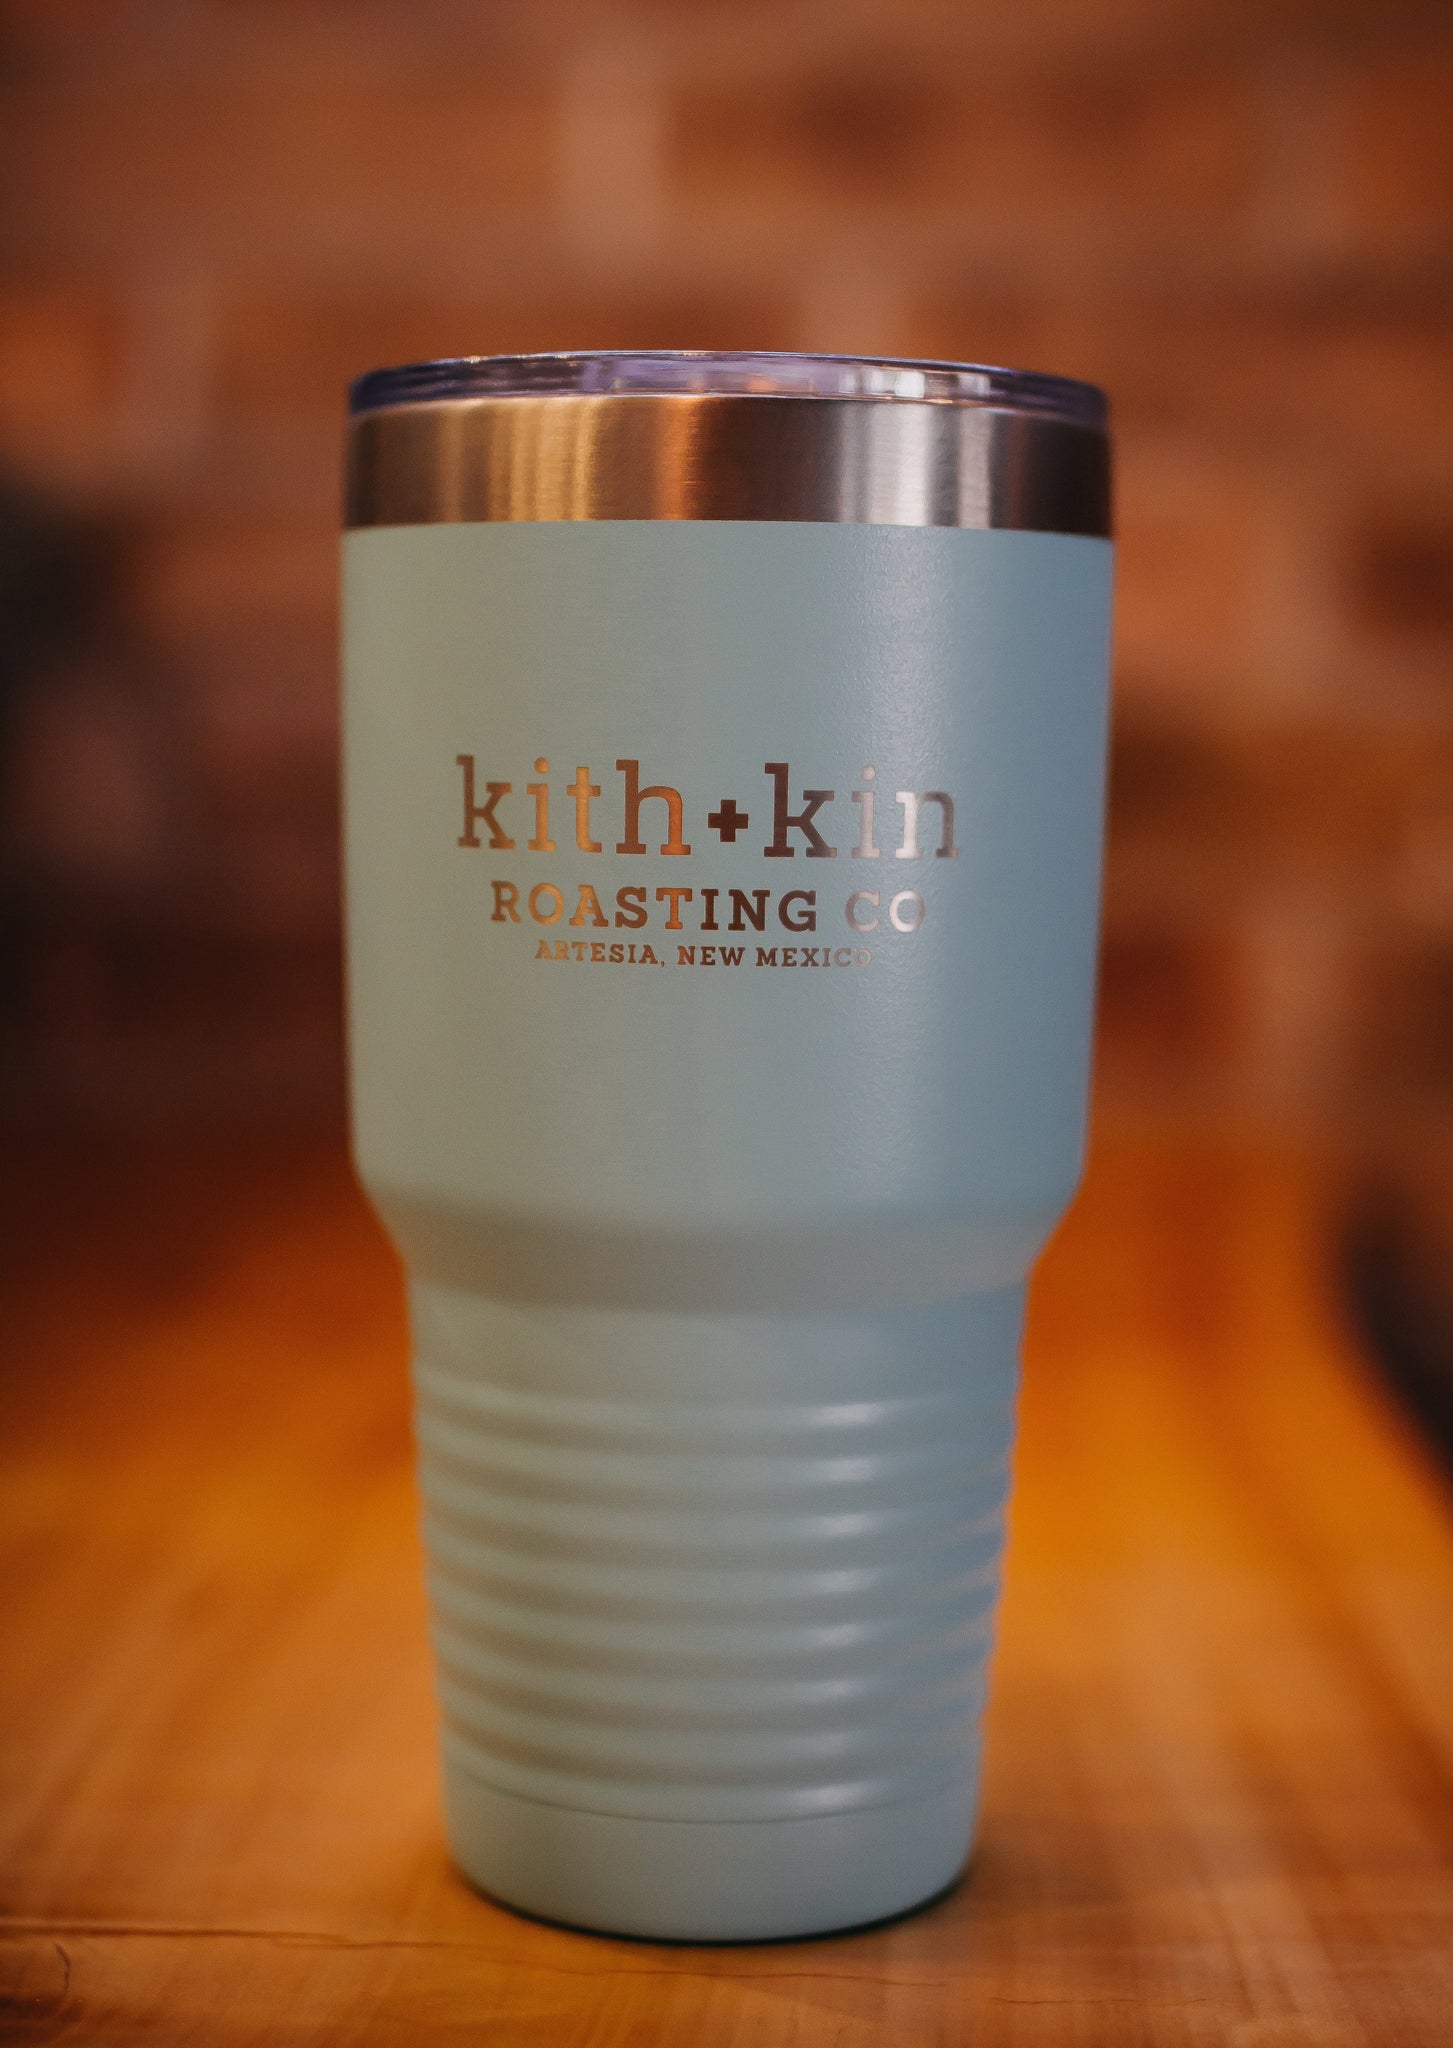 Beast 30 oz Tumbler Stainless … curated on LTK